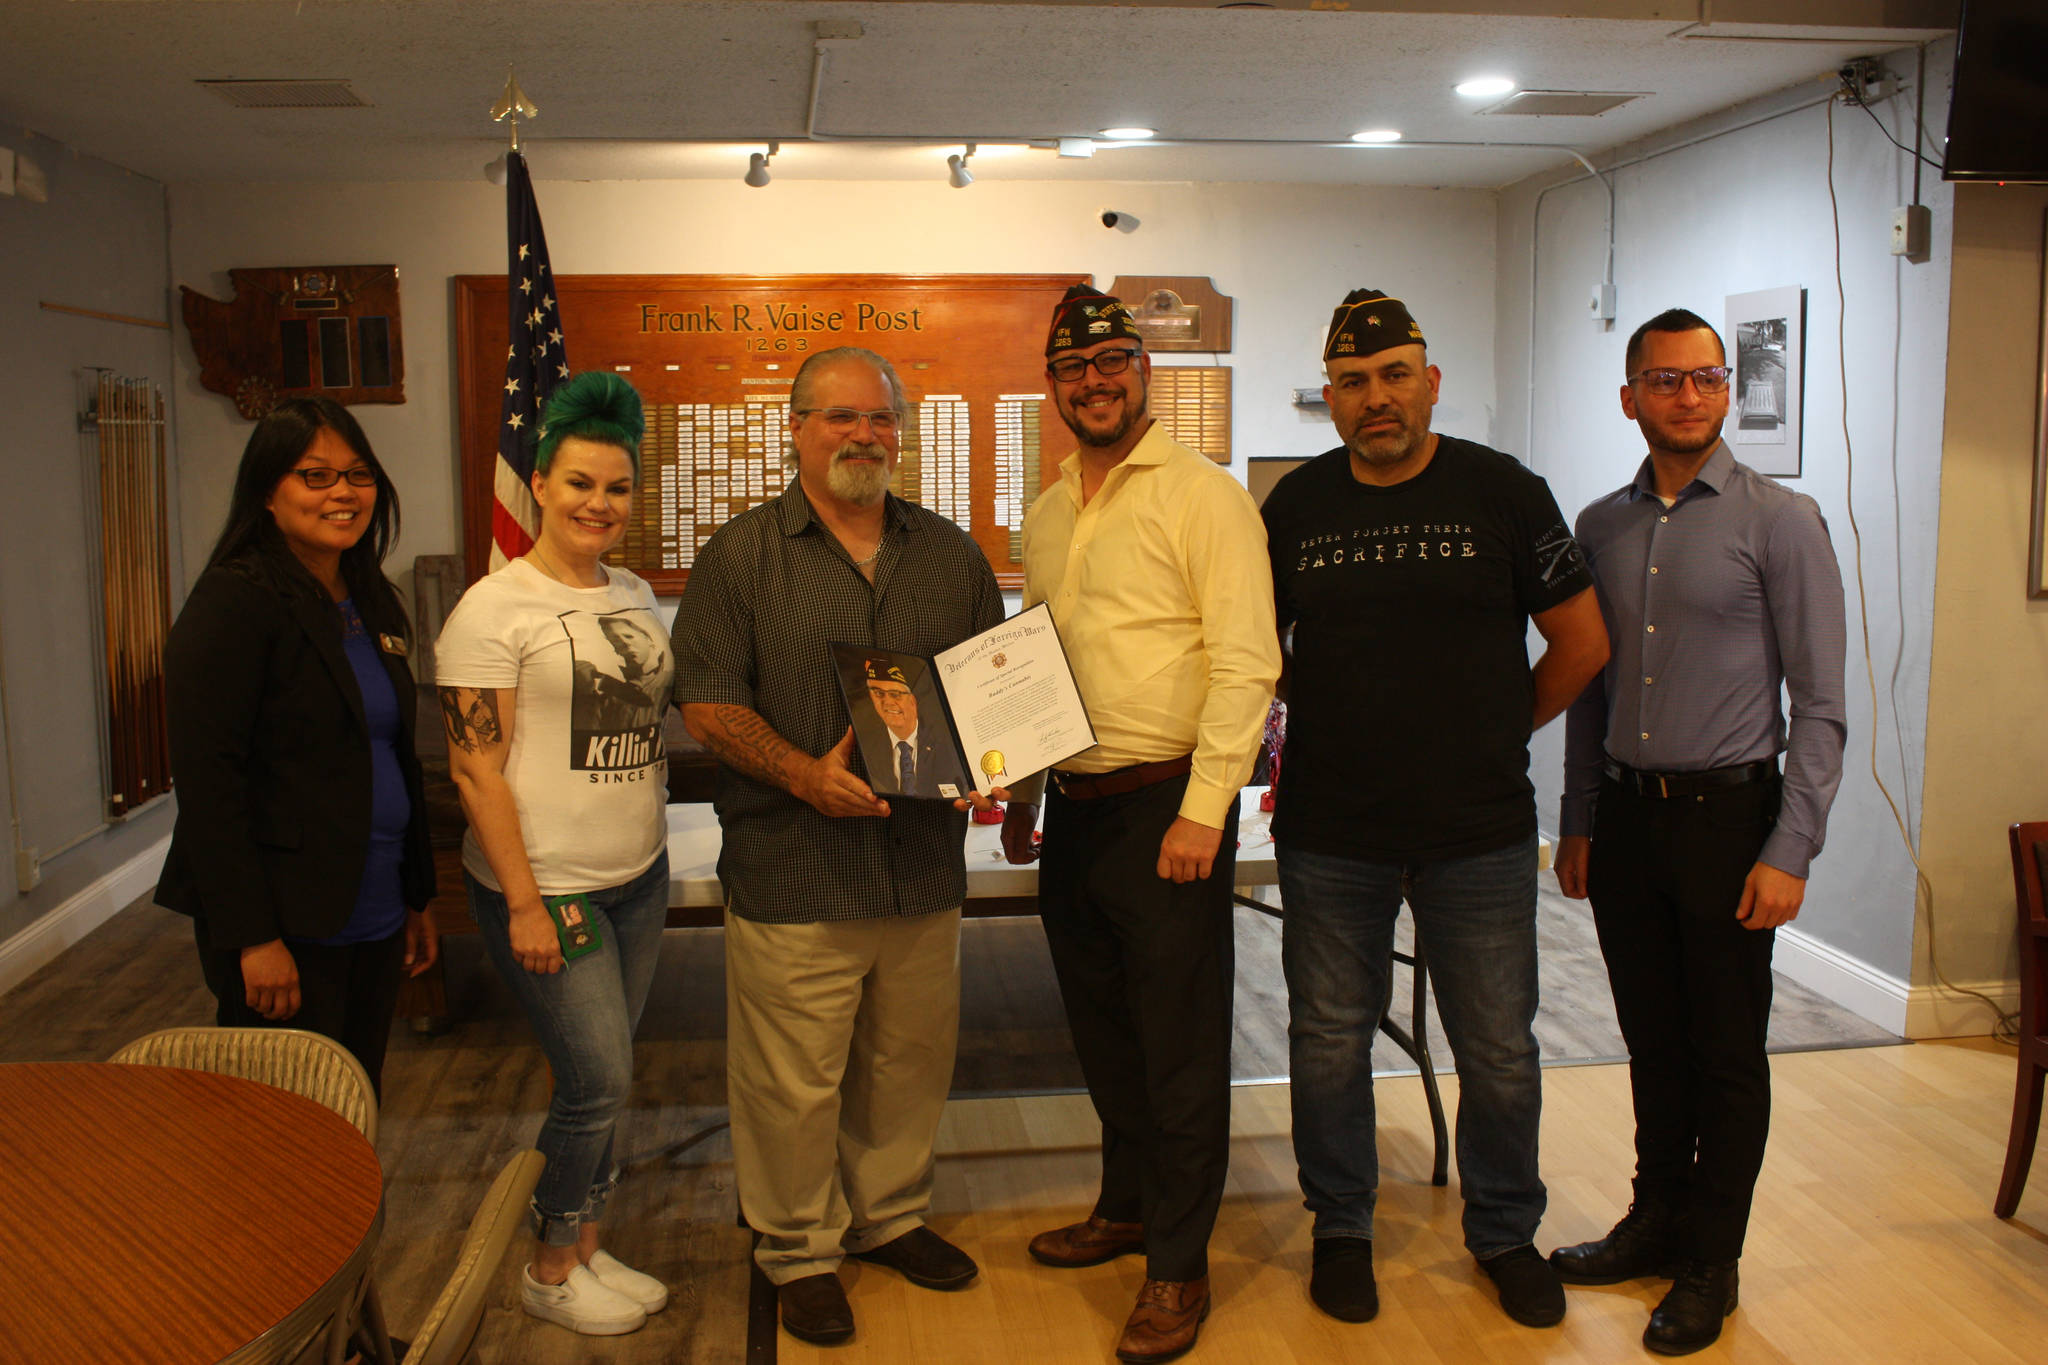 (left to right) Renton City Councilmember, Kim-Khanh Van, Manager at Buddy’s Cannabis, Nicole Meador, Owner of Buddy’s Cannabis, Myles Harlow Kahn, Former Post Commander, Joshua Schreck, Post Commander, Martin Tamayo, pose as Buddy’s Cannabis owner receive VFW award. (photo credit: Cameron Sheppard)